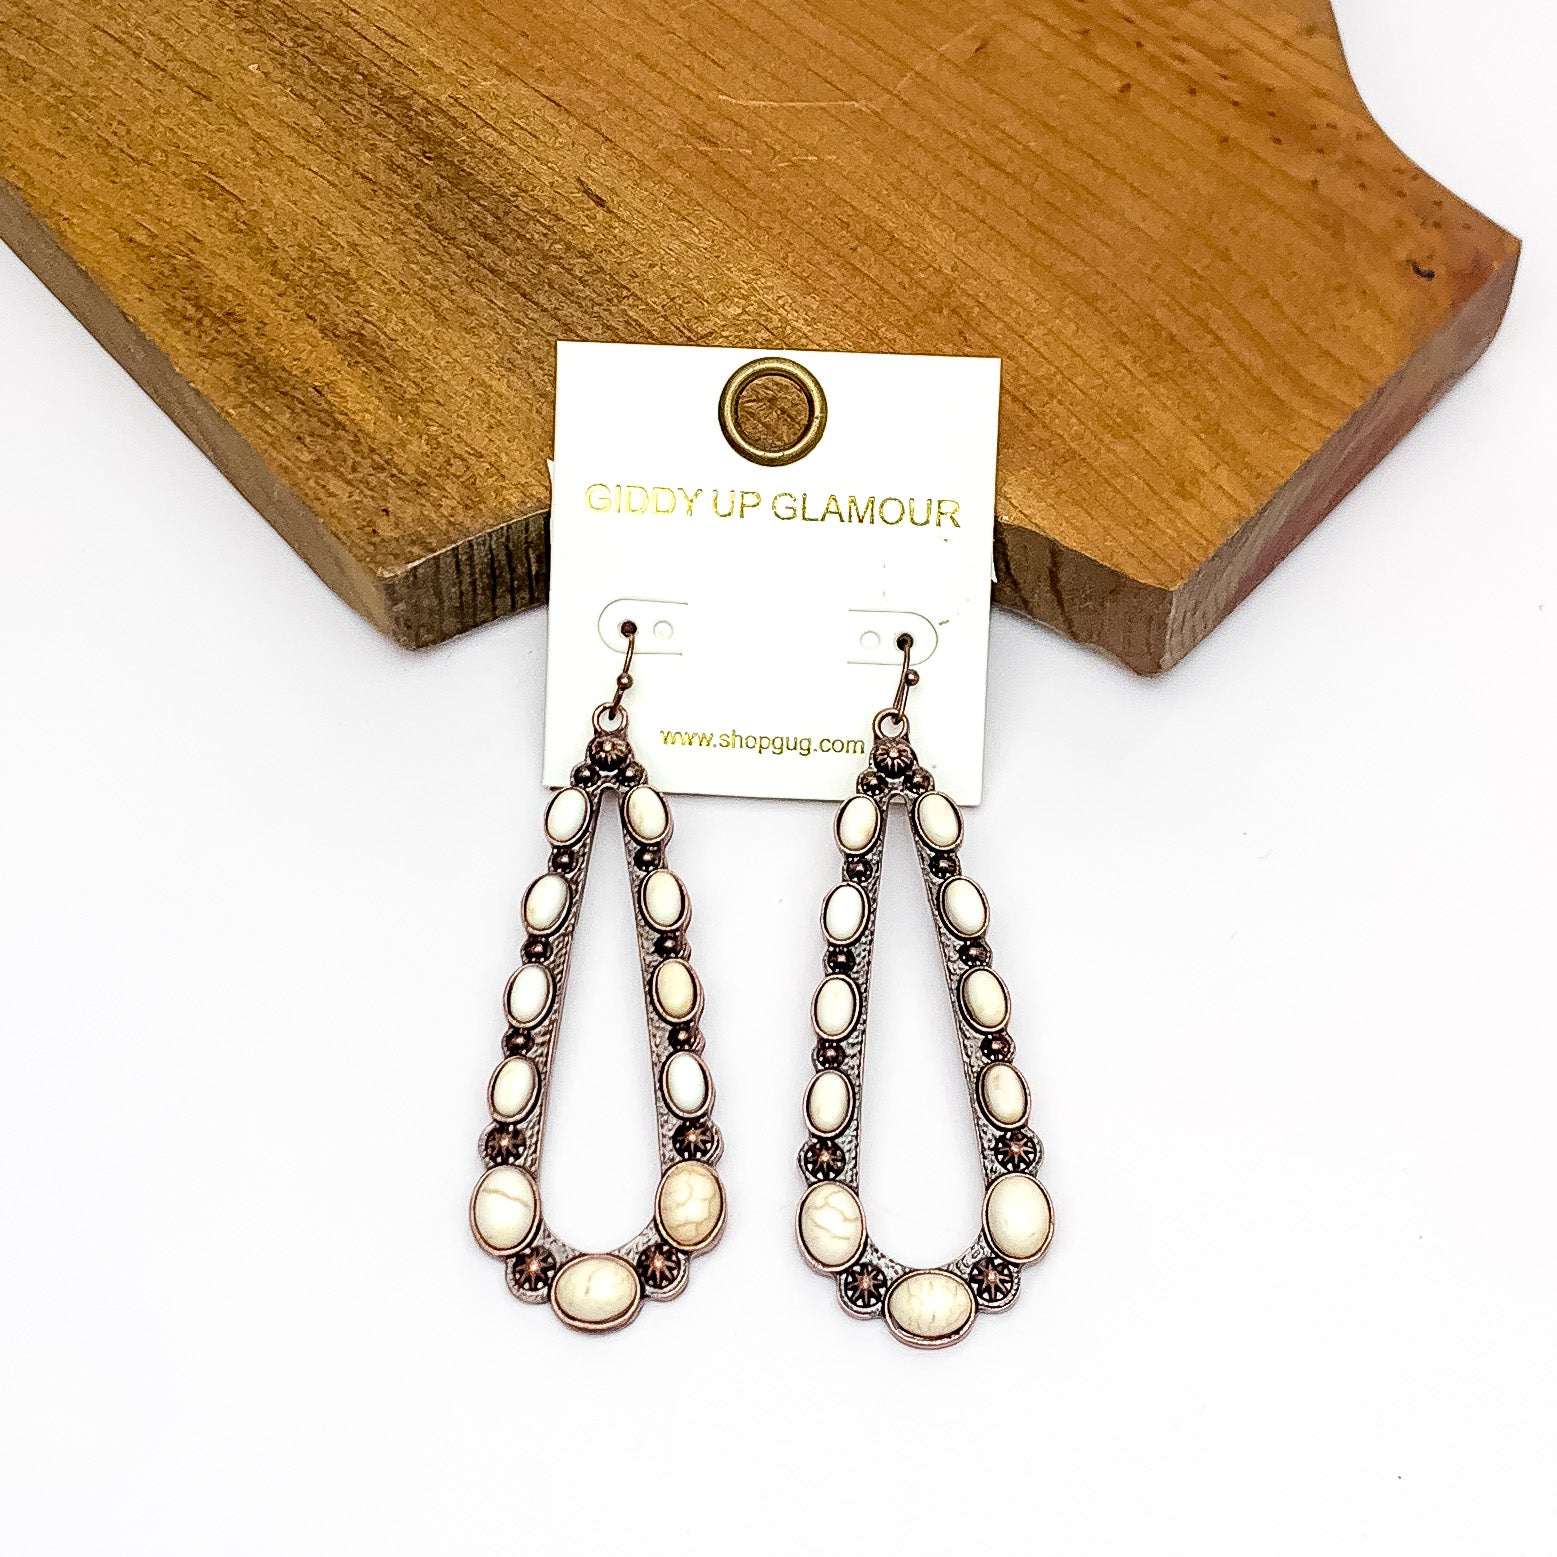 Copper Tone Open Teardrop Earrings With Stones in Ivory. Pictured on a white background with the earrings laying against a wood piece.